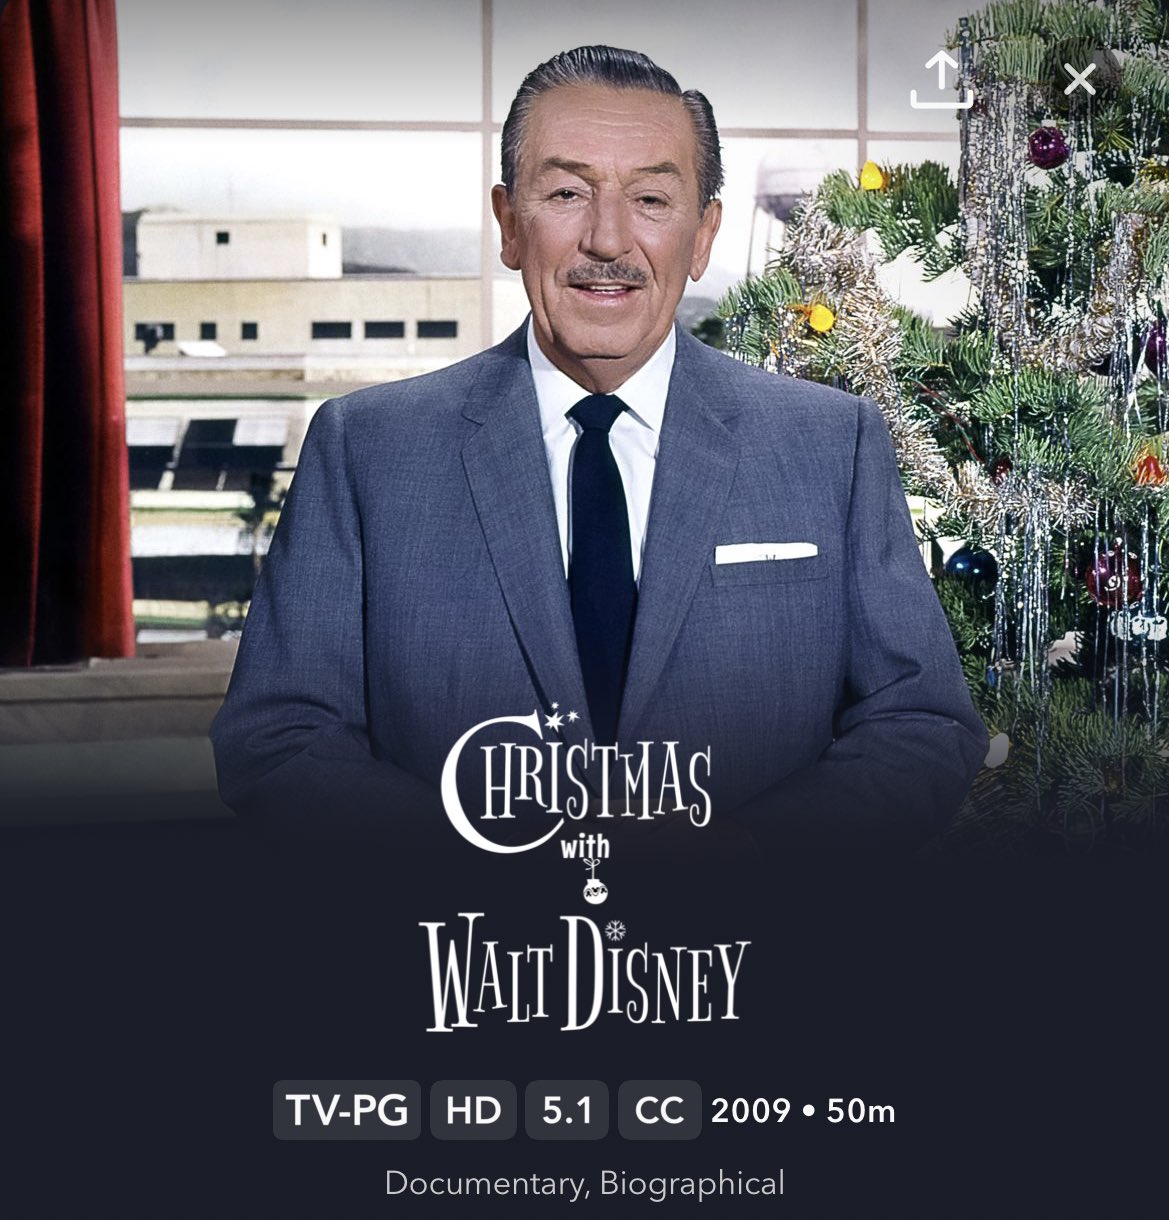 sincerely, ivy marie. 💫 on X: "CHRISTMAS WITH WALT DISNEY IS NOW ON DISNEY  PLUS AND I AM SO FULL OF HOLIDAY SPIRIT. https://t.co/xebEPrs8Ai" / X